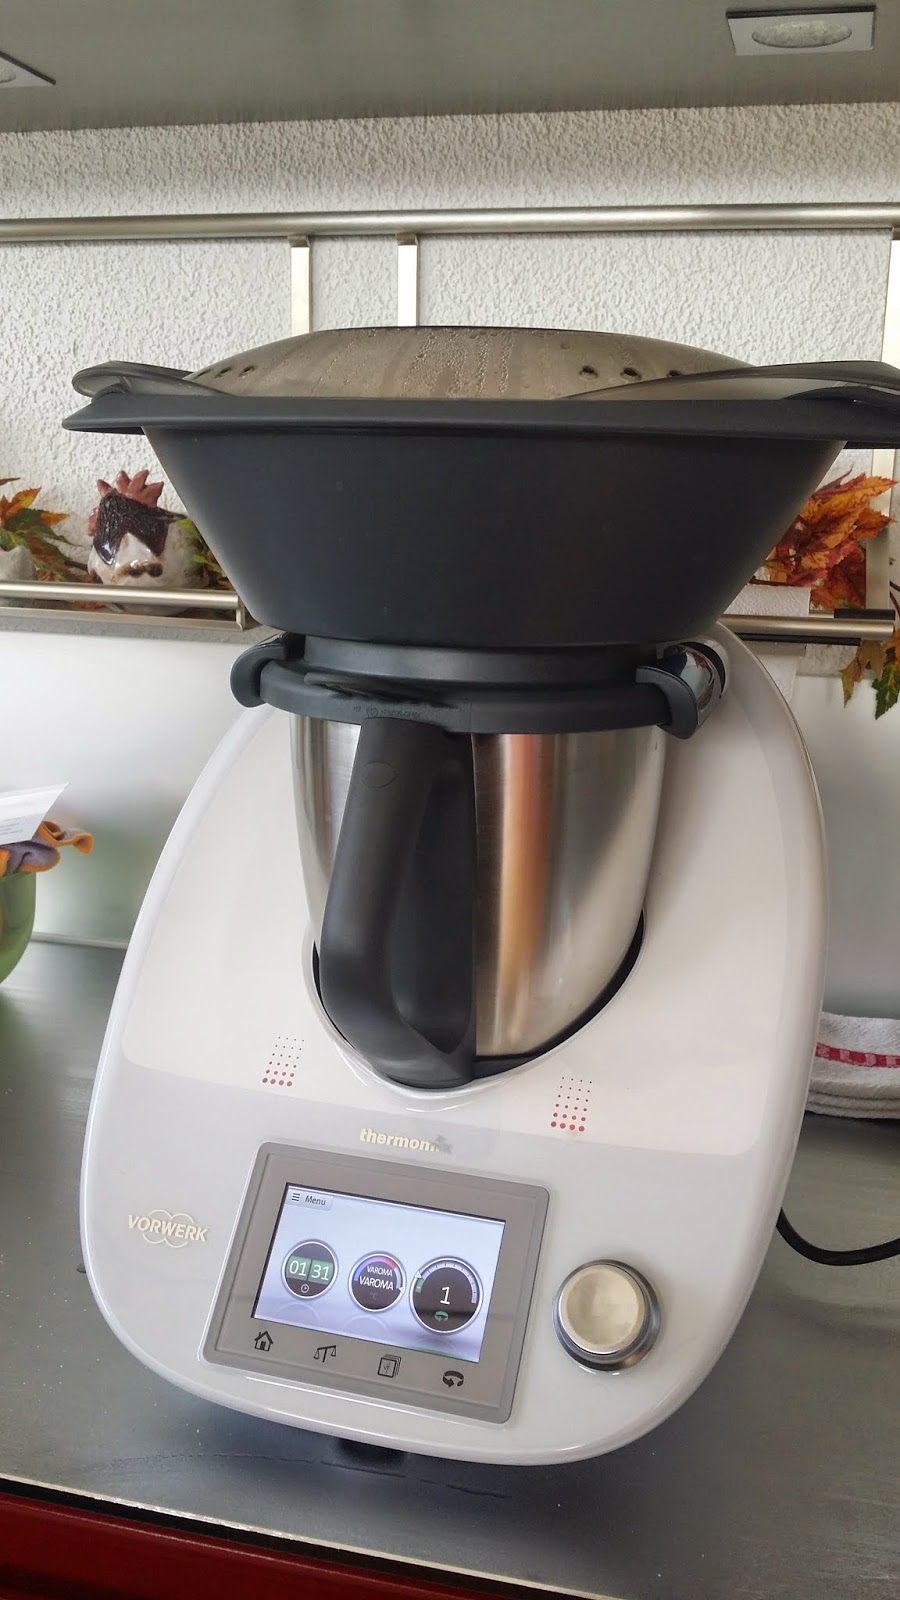 Aussie in a Swiss kitchen The new Thermomix TM5 is here!